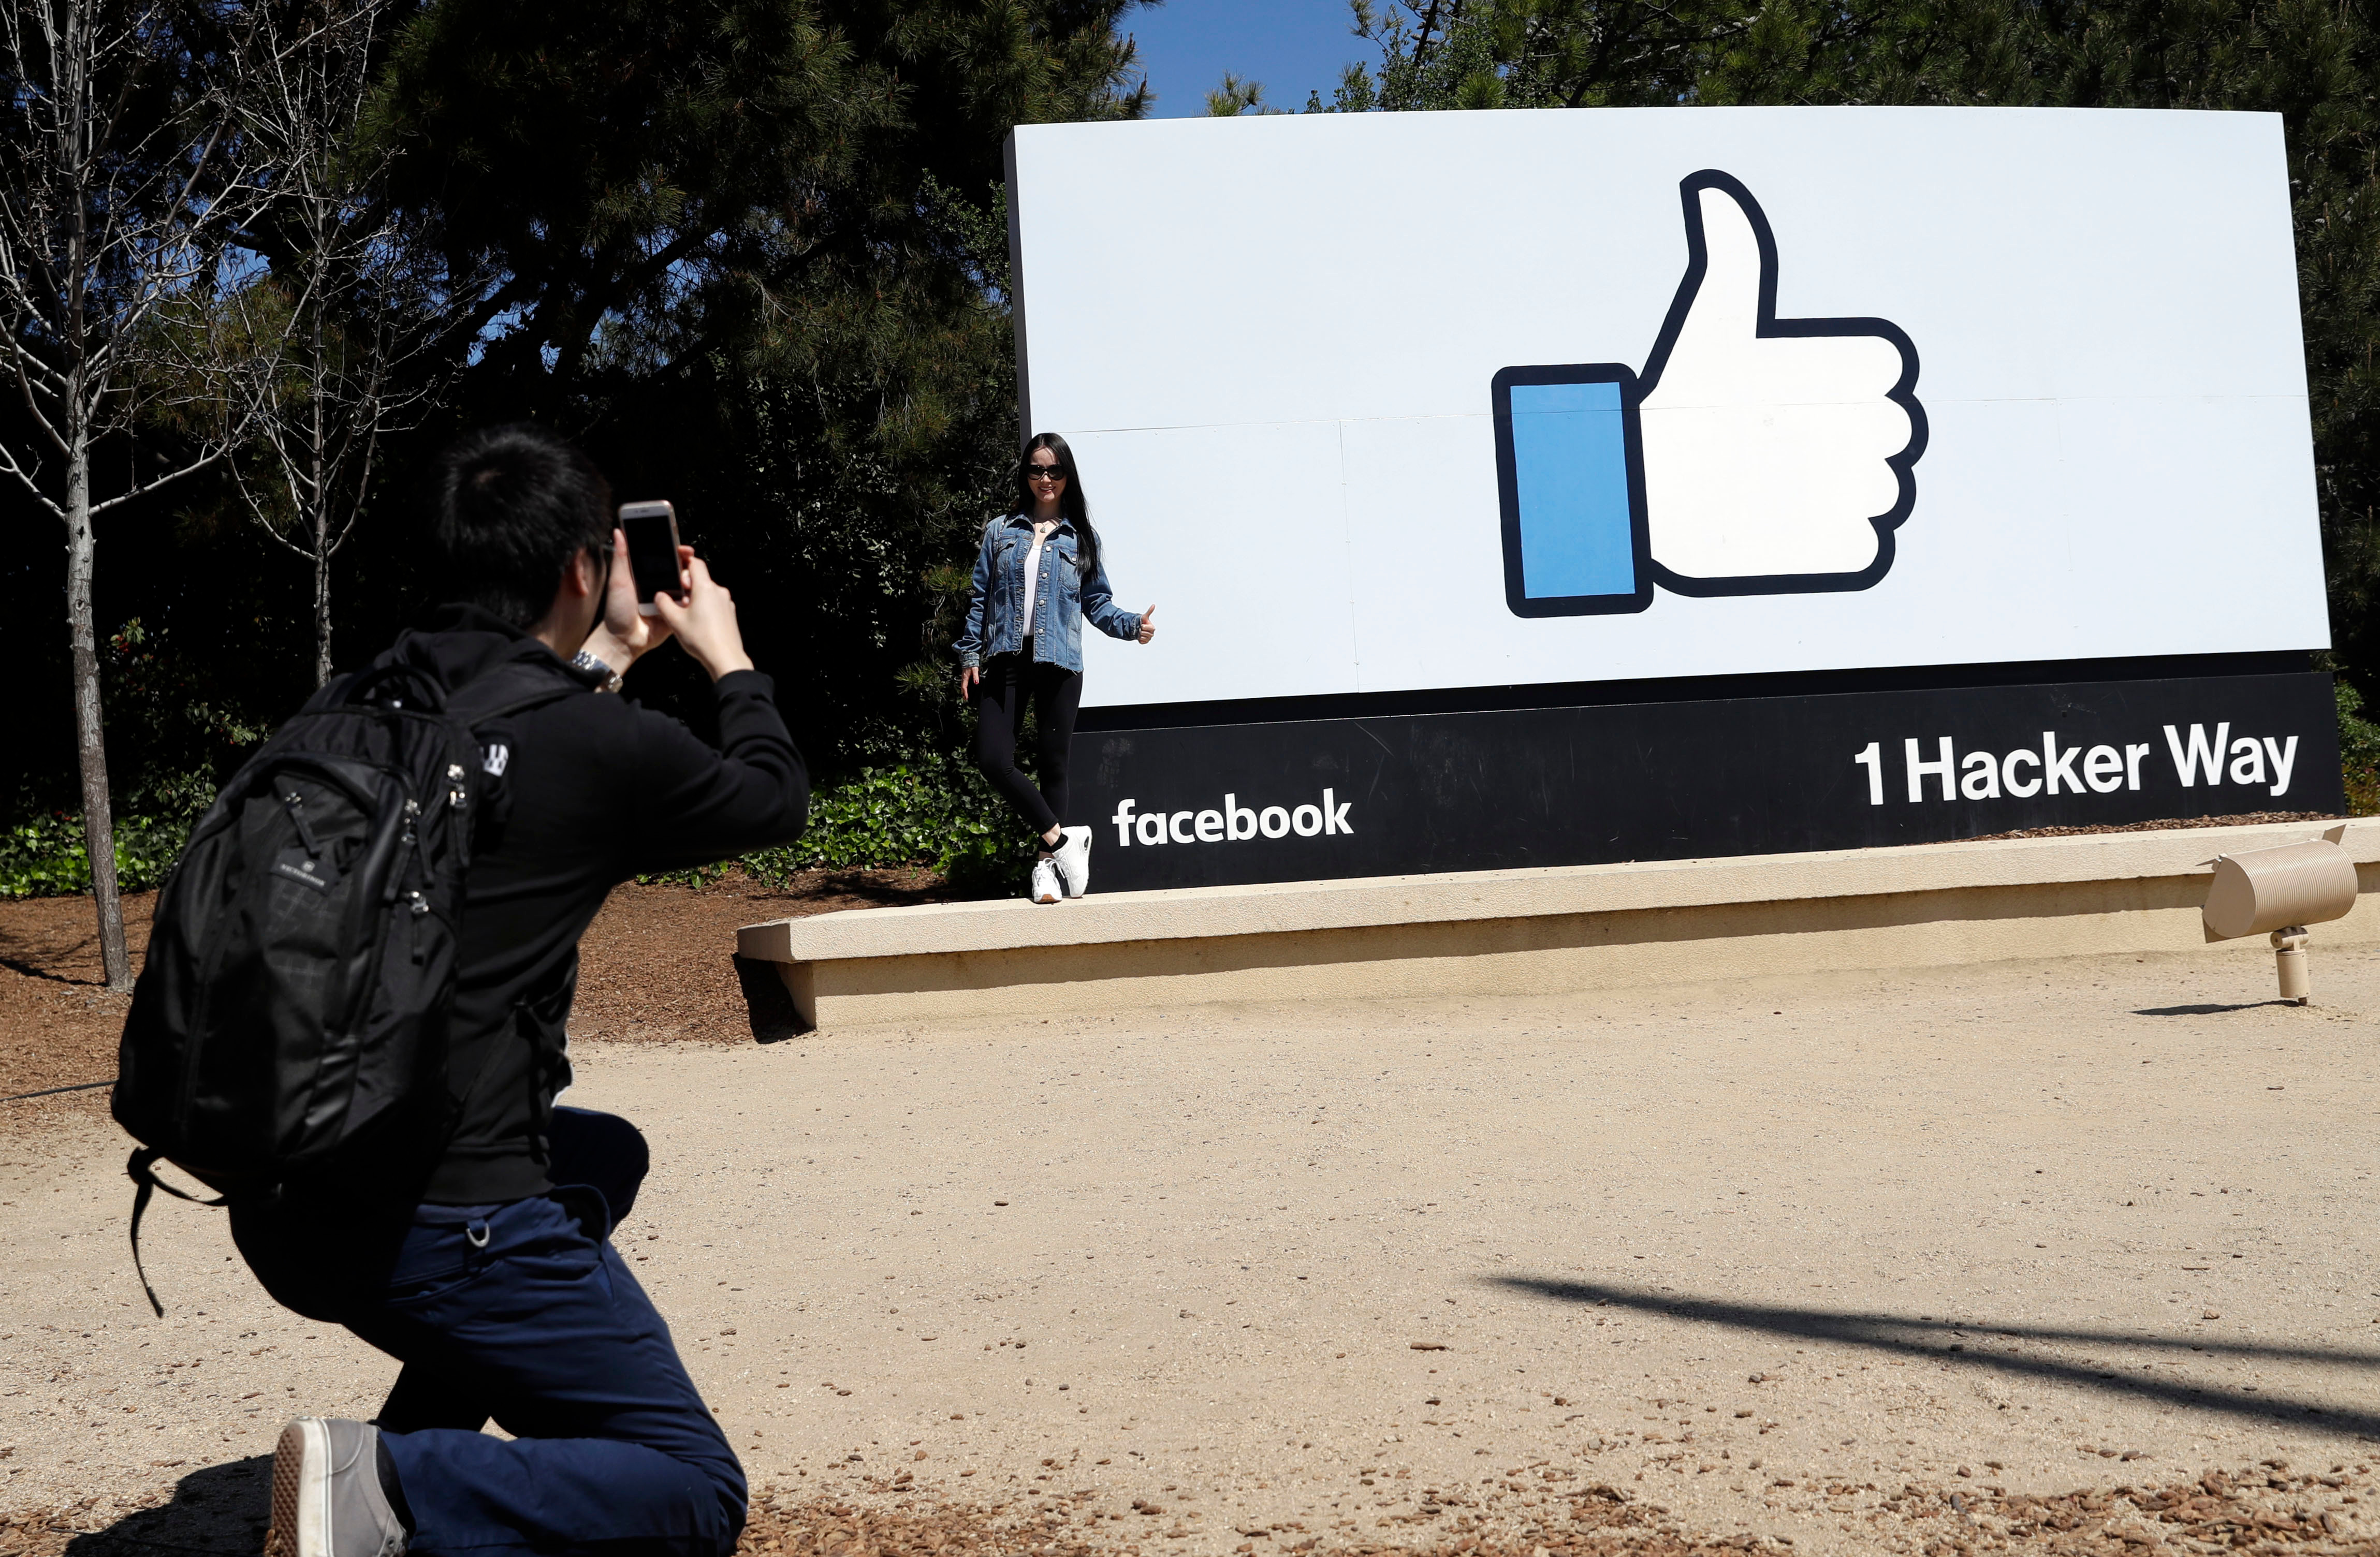 Facebook thumbs up on a sign